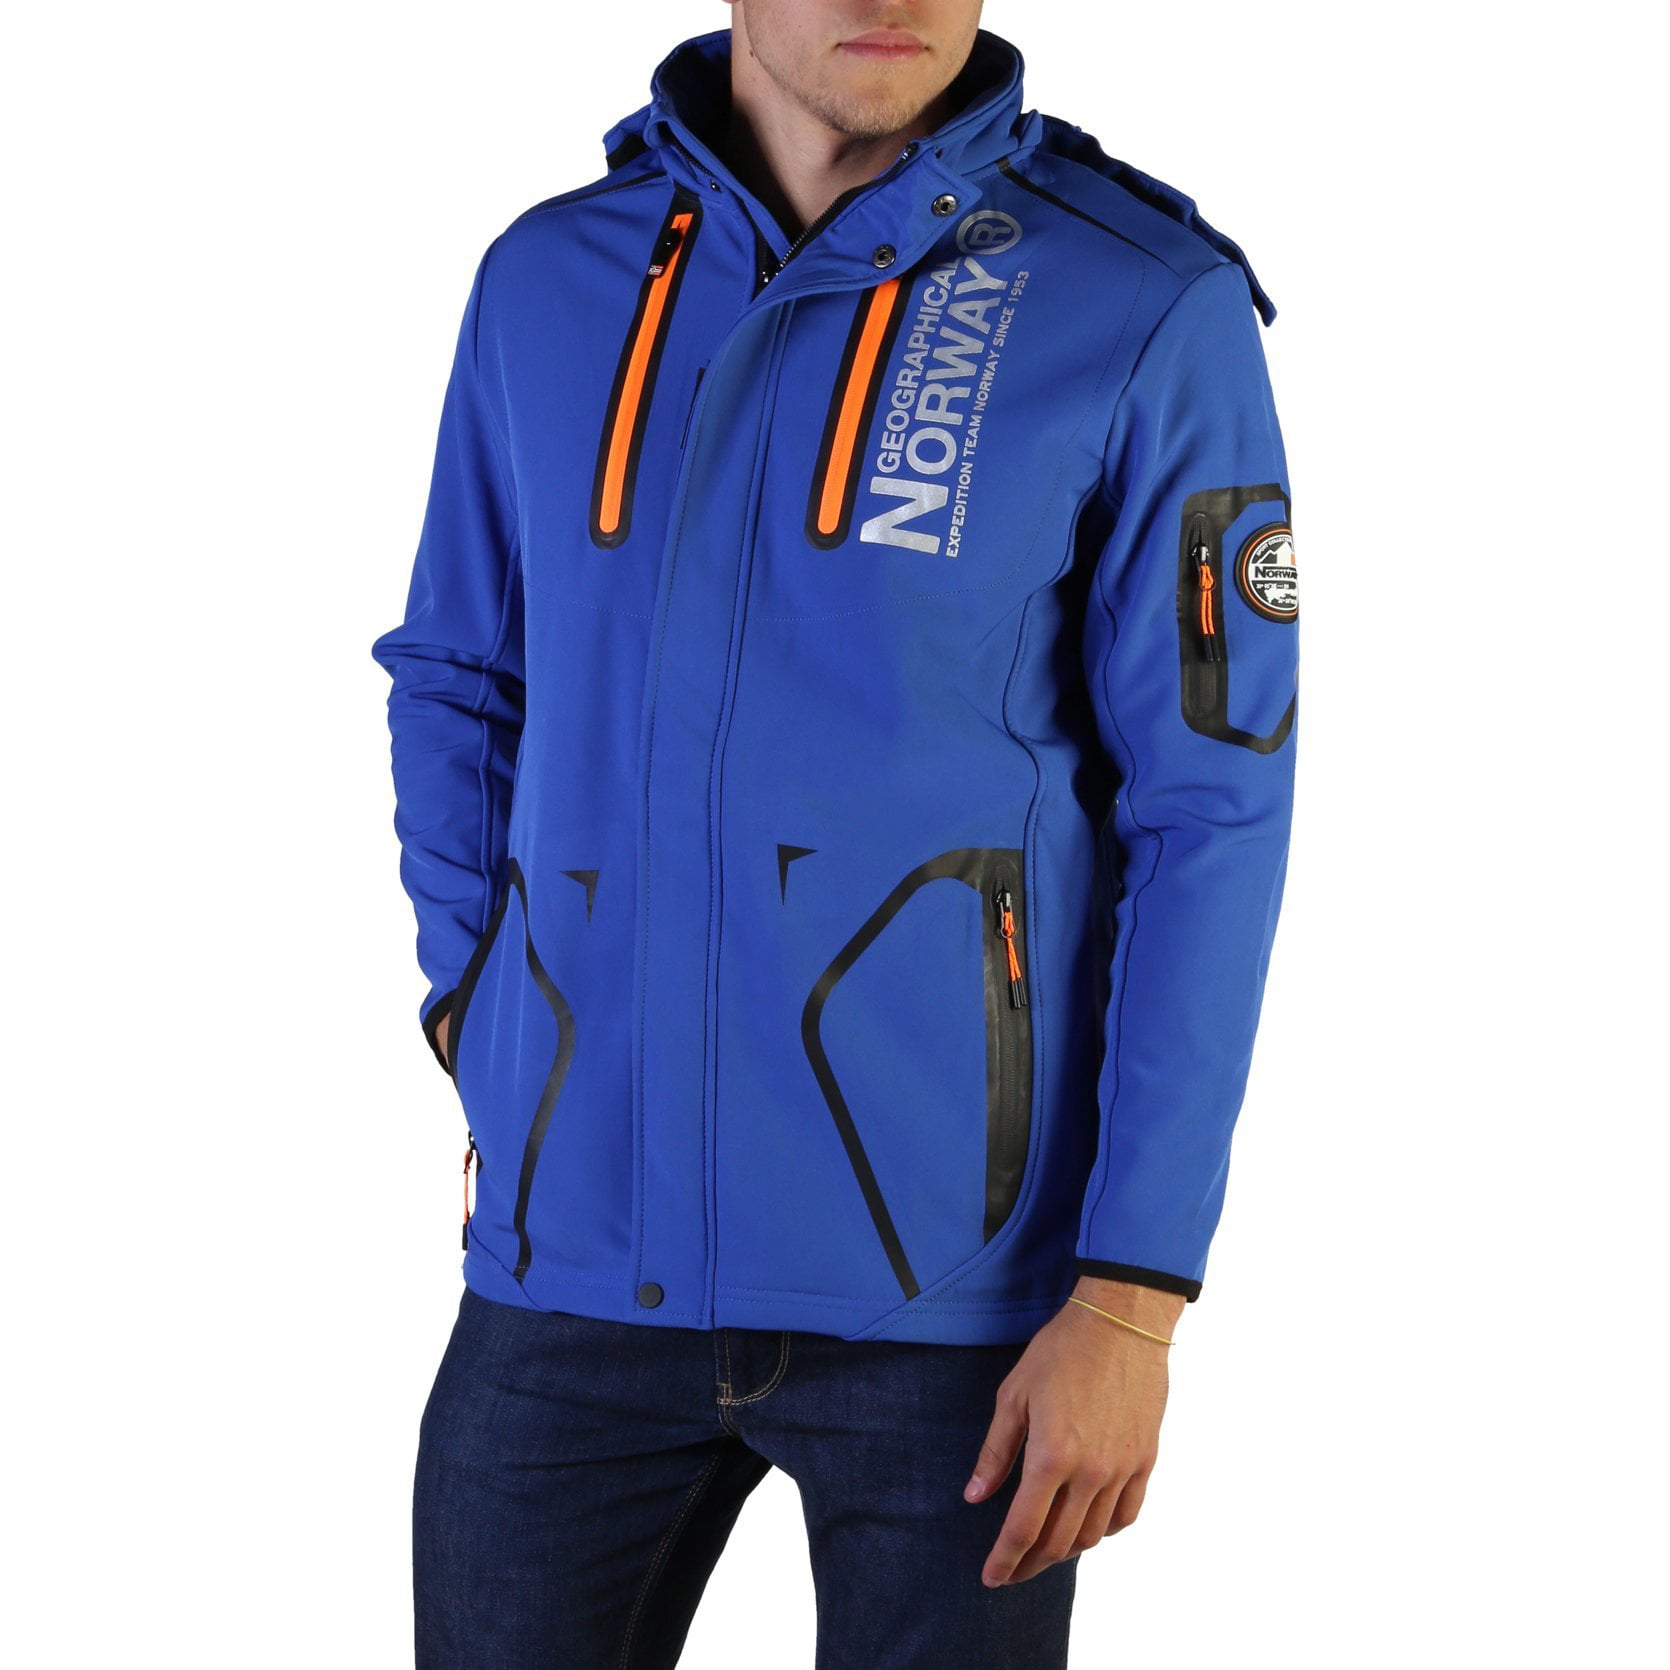 Chaqueta hombre Geographical Norway (talla S, XL y XXL)